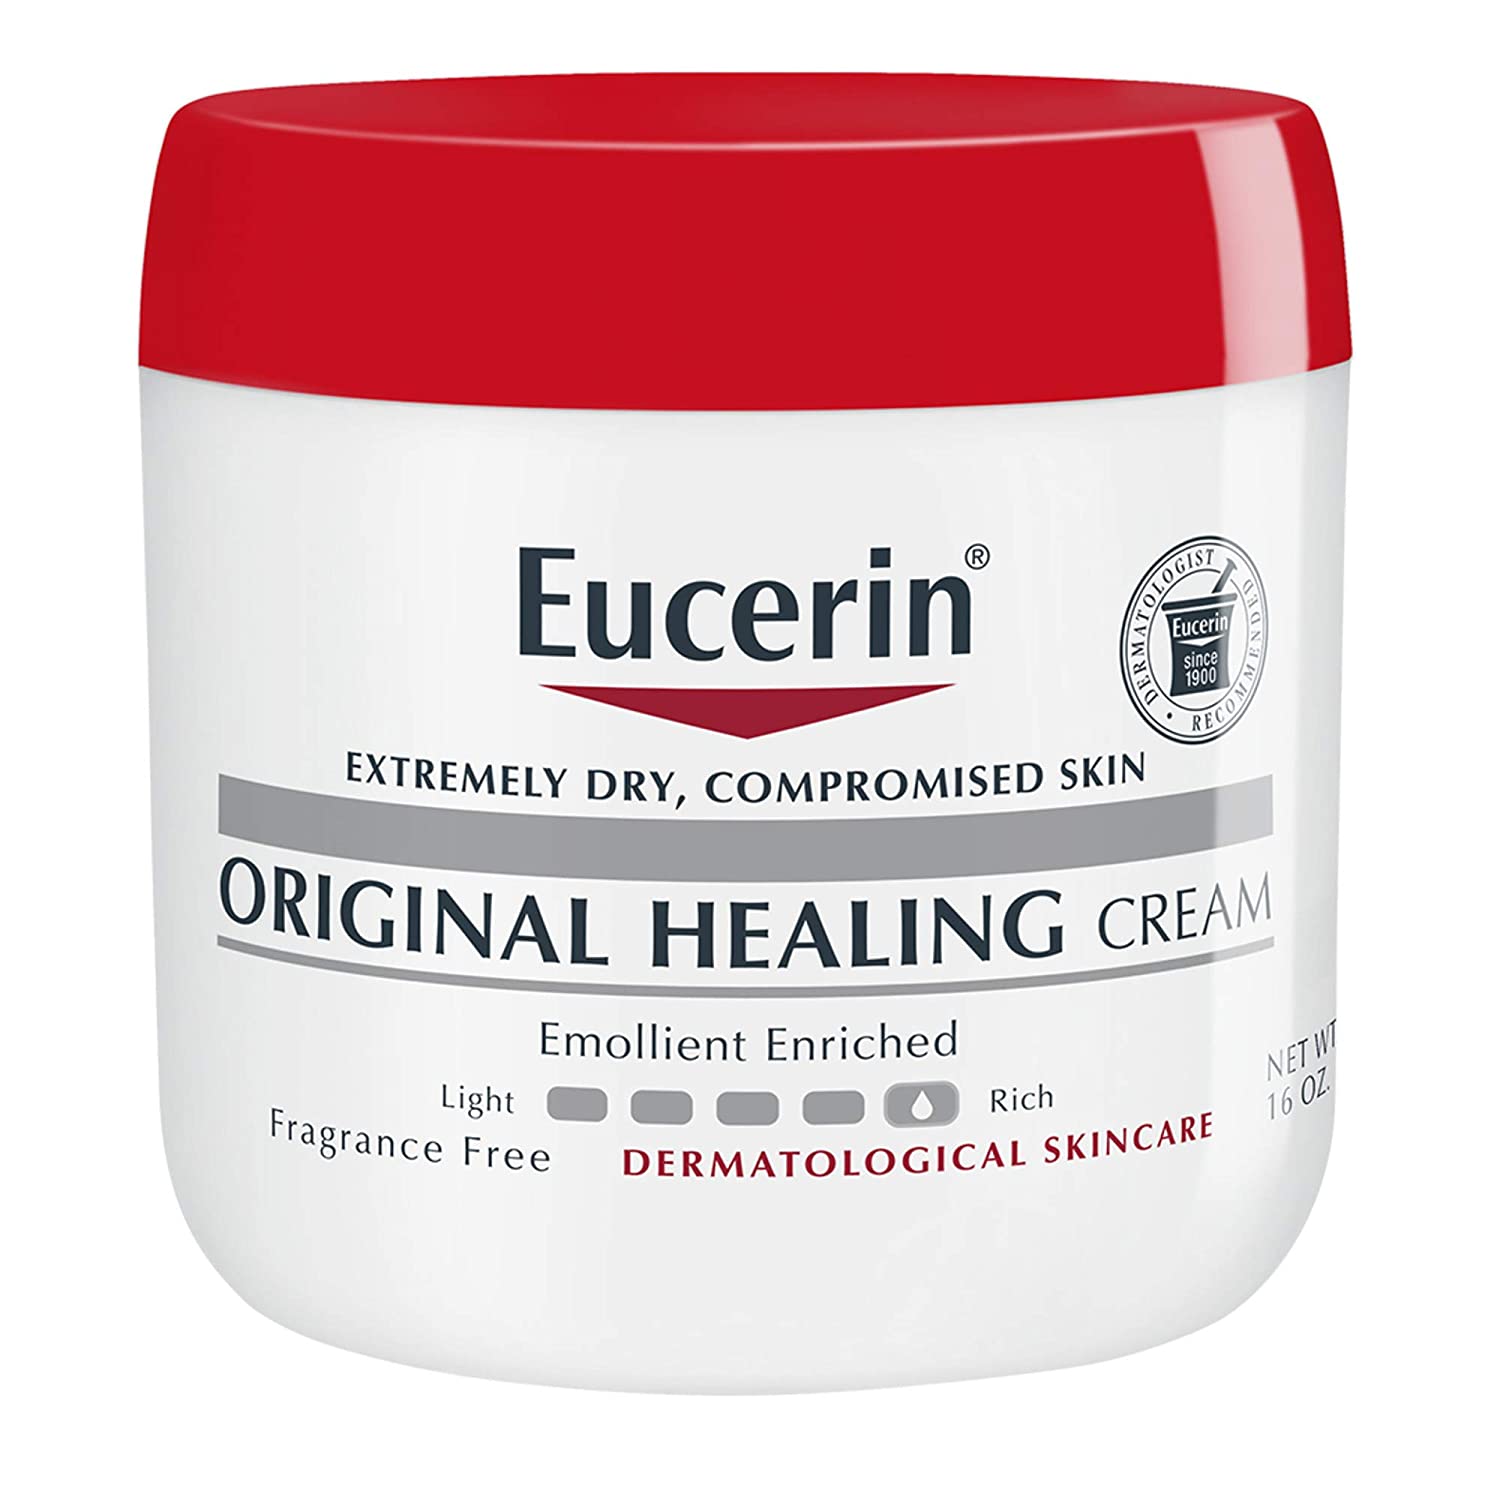 ''Eucerin Original Healing Cream - Fragrance Free, Rich LOTION for Extremely Dry Skin - 16 oz. Jar''